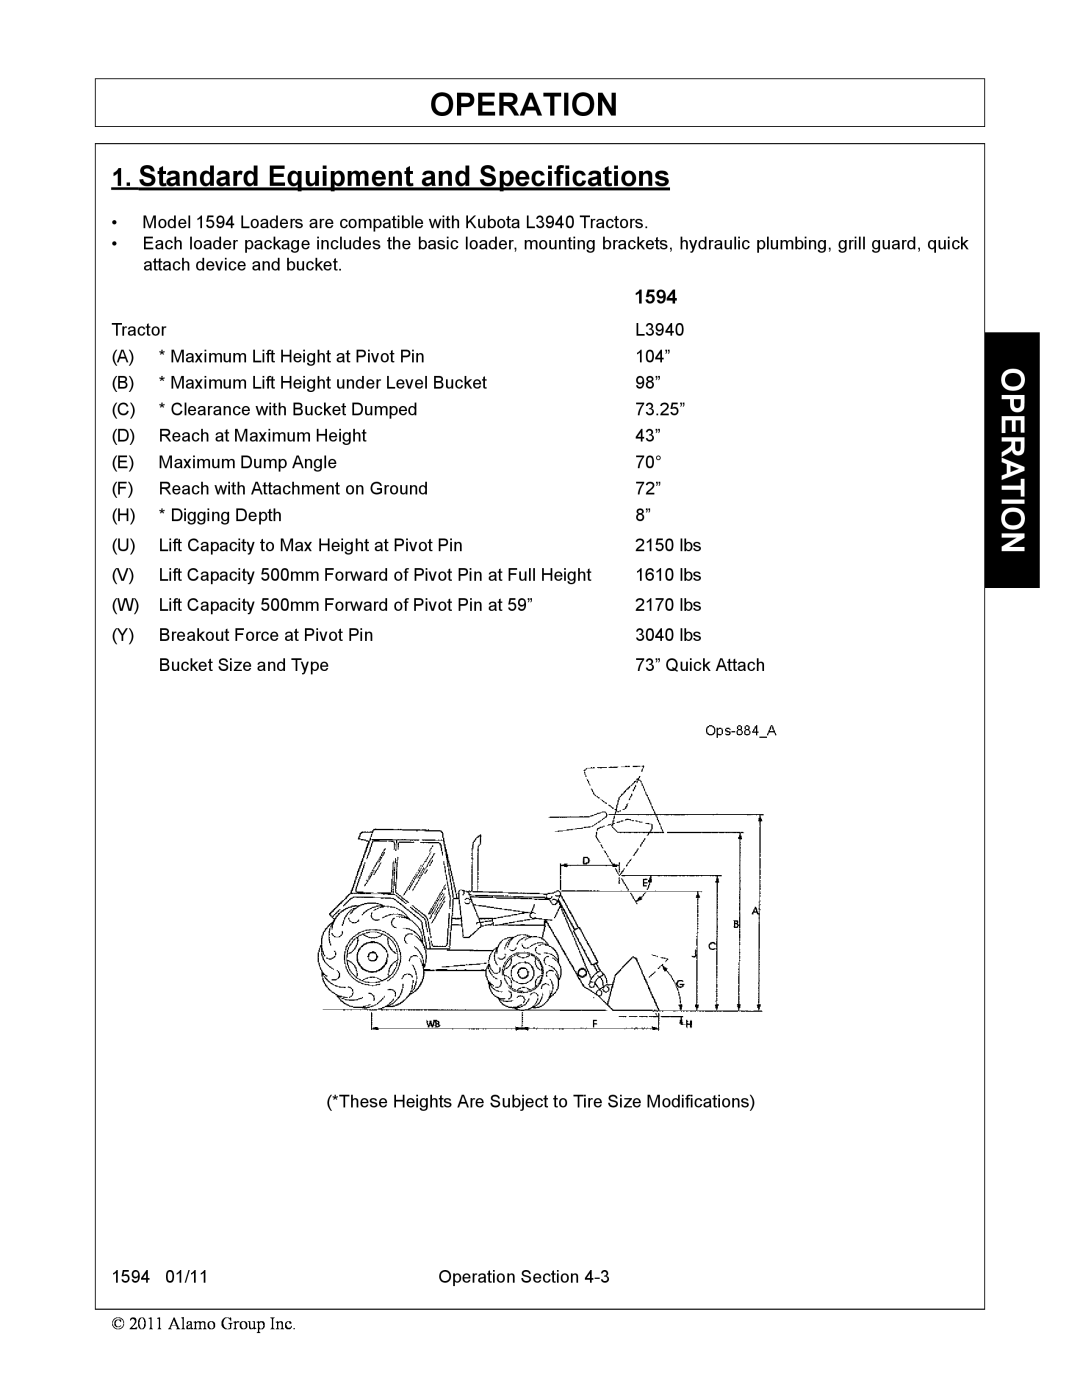 Rhino Mounts 1594 manual Operation, Standard Equipment and Specifications 